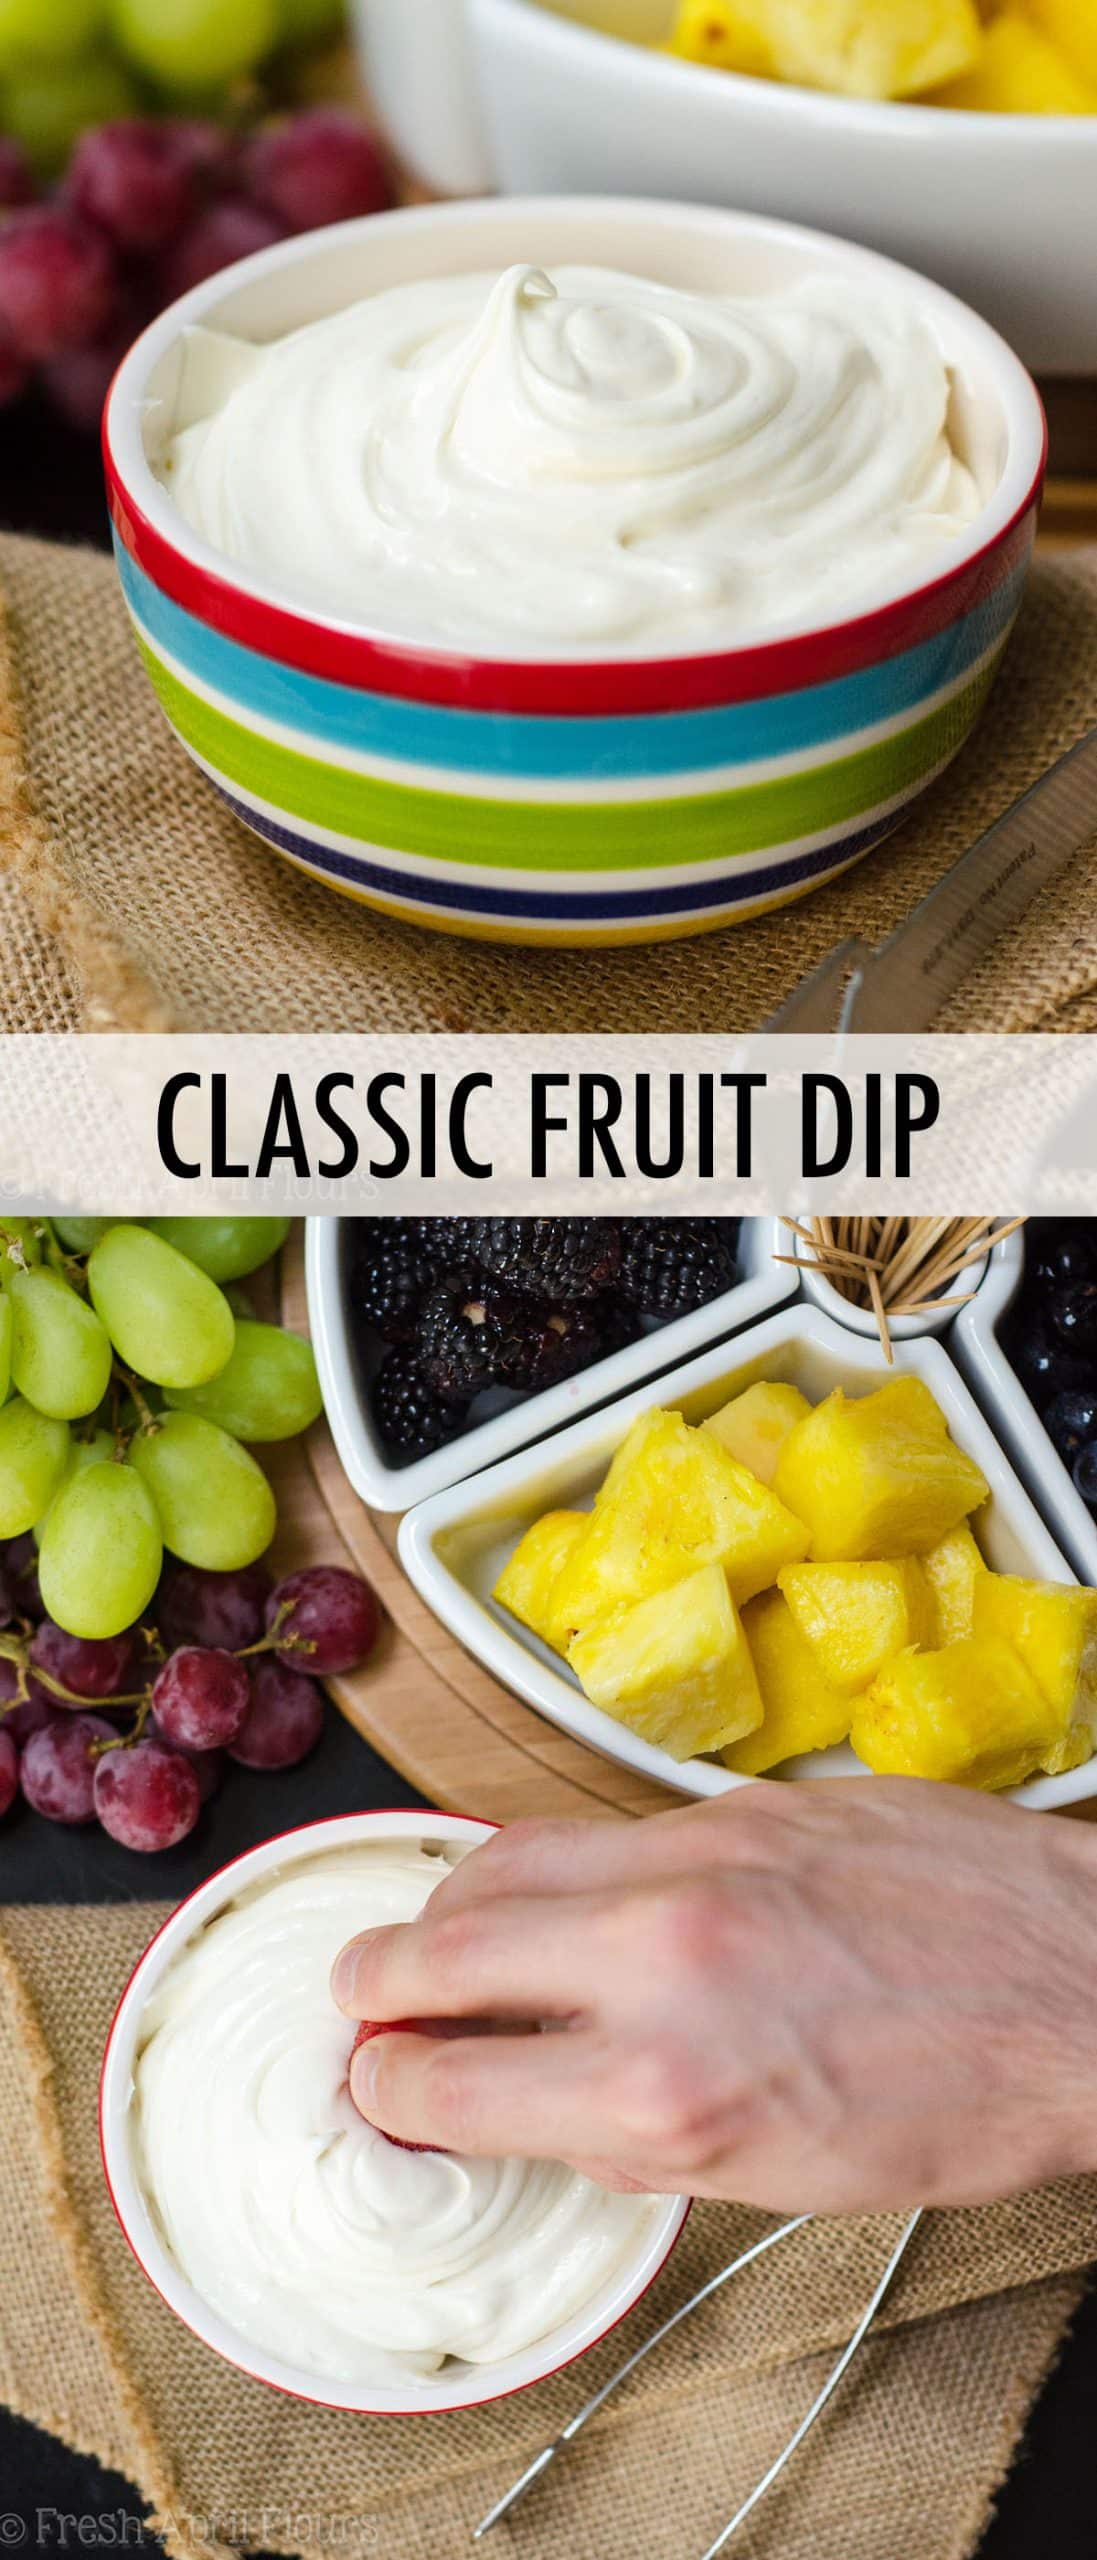 You only need two ingredients to make my favorite fruit dip. Make this easy fruit dip recipe even tastier by adding your favorite extract! Serve with your favorite fresh fruit or suggested list of other dippable snacks. via @frshaprilflours